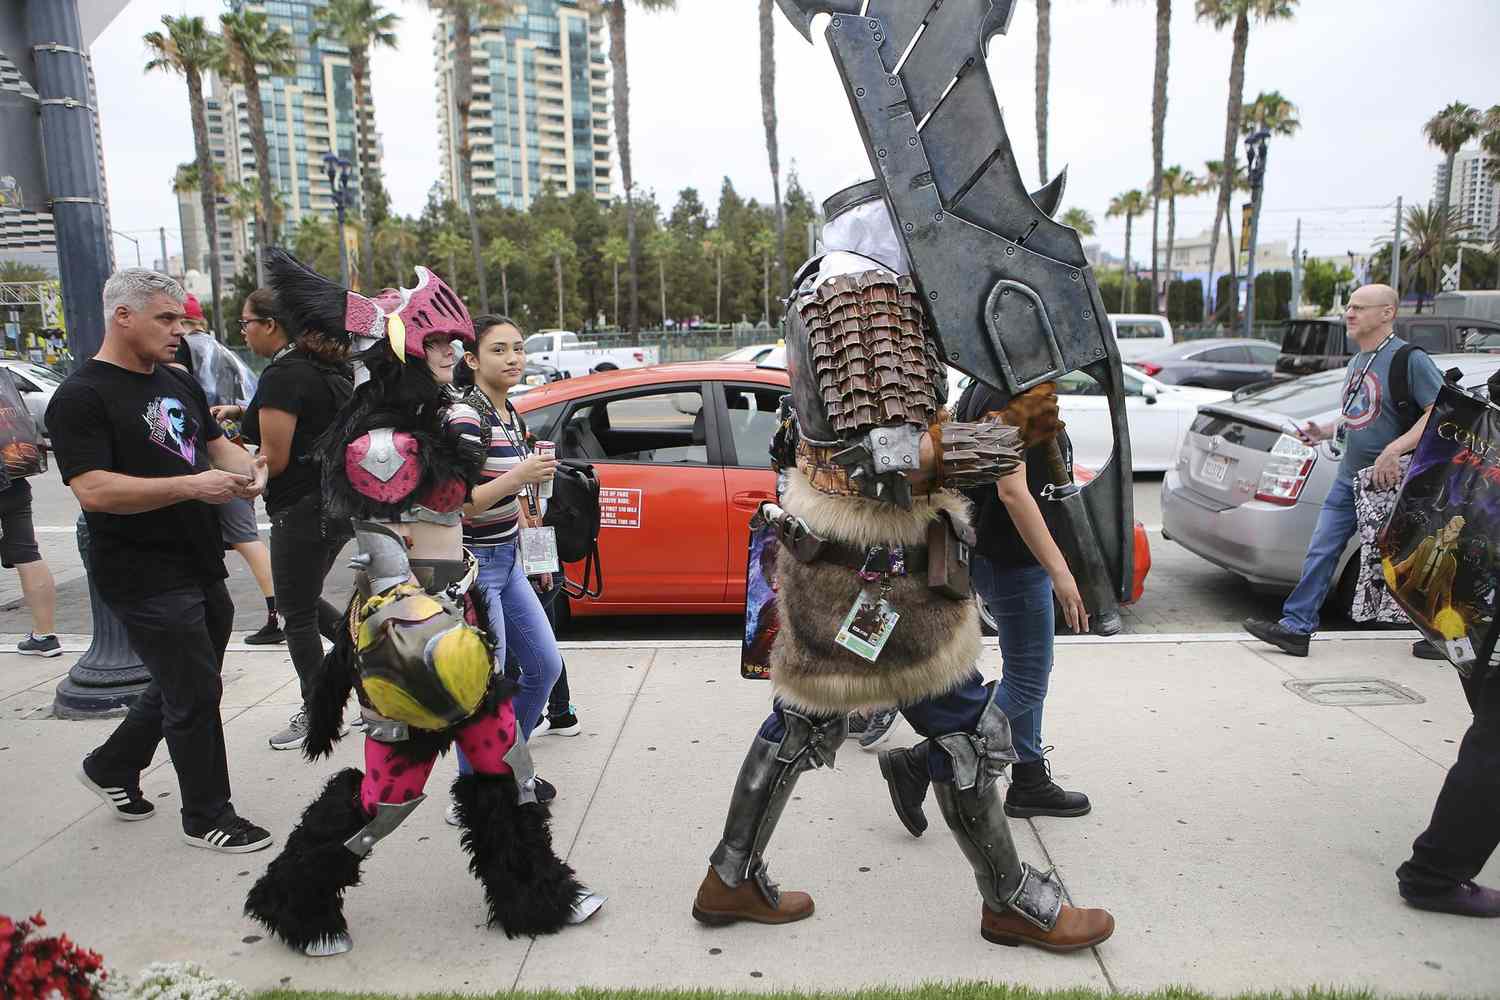 Comic-Con Fans Descend On San Diego Dressed As Their Favorite Characters